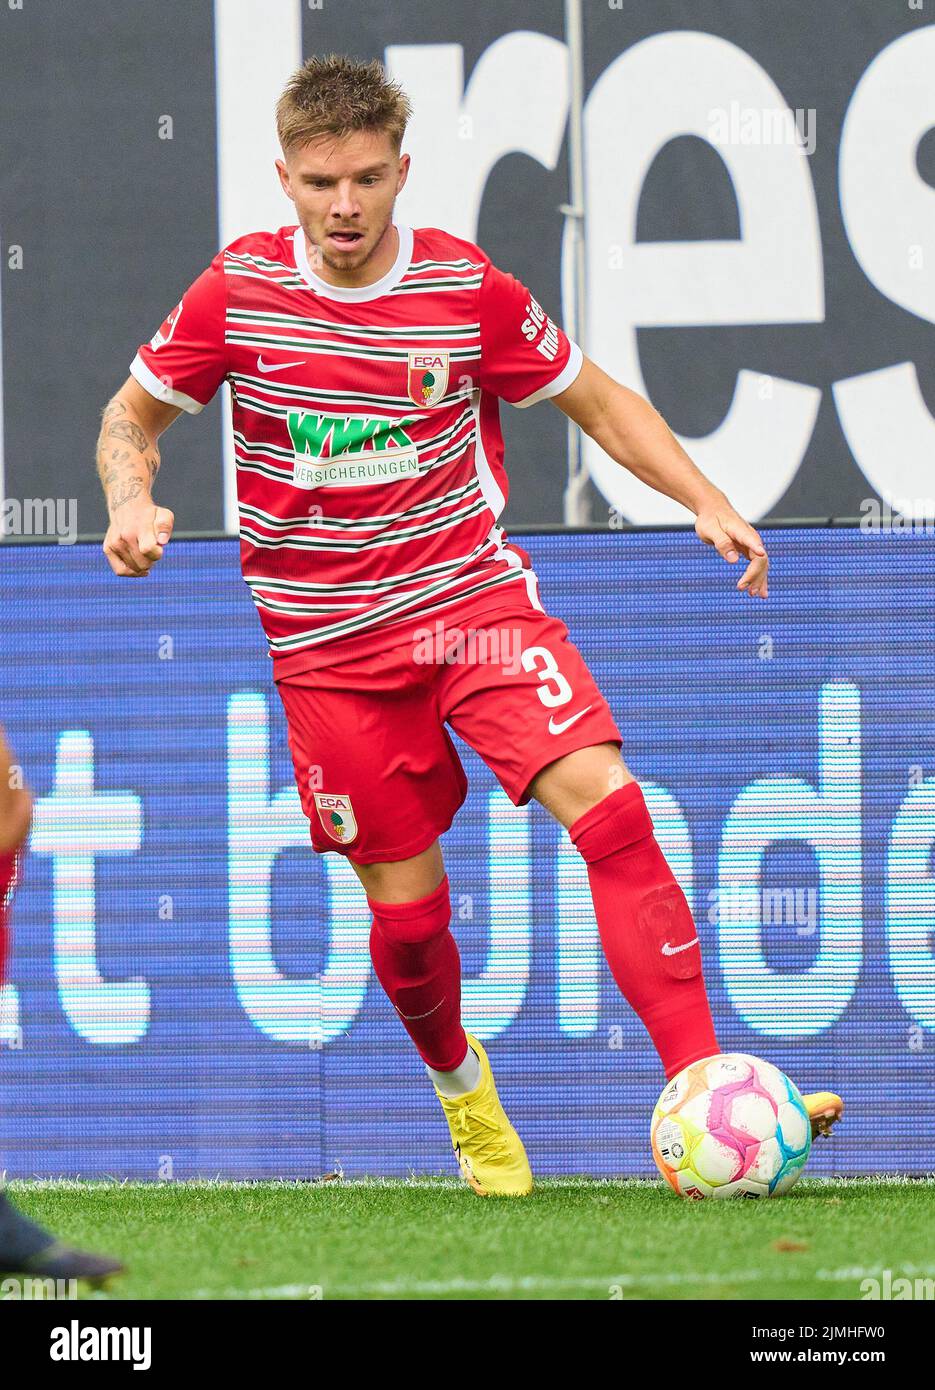 Mats PEDERSEN, FCA 3  in the match FC AUGSBURG - SC FREIBURG 0-4 1.German Football League on Aug 06, 2022 in Augsburg, Germany. Season 2022/2023, matchday 1, 1.Bundesliga, FCB, Munich, 1.Spieltag © Peter Schatz / Alamy Live News    - DFL REGULATIONS PROHIBIT ANY USE OF PHOTOGRAPHS as IMAGE SEQUENCES and/or QUASI-VIDEO - Stock Photo